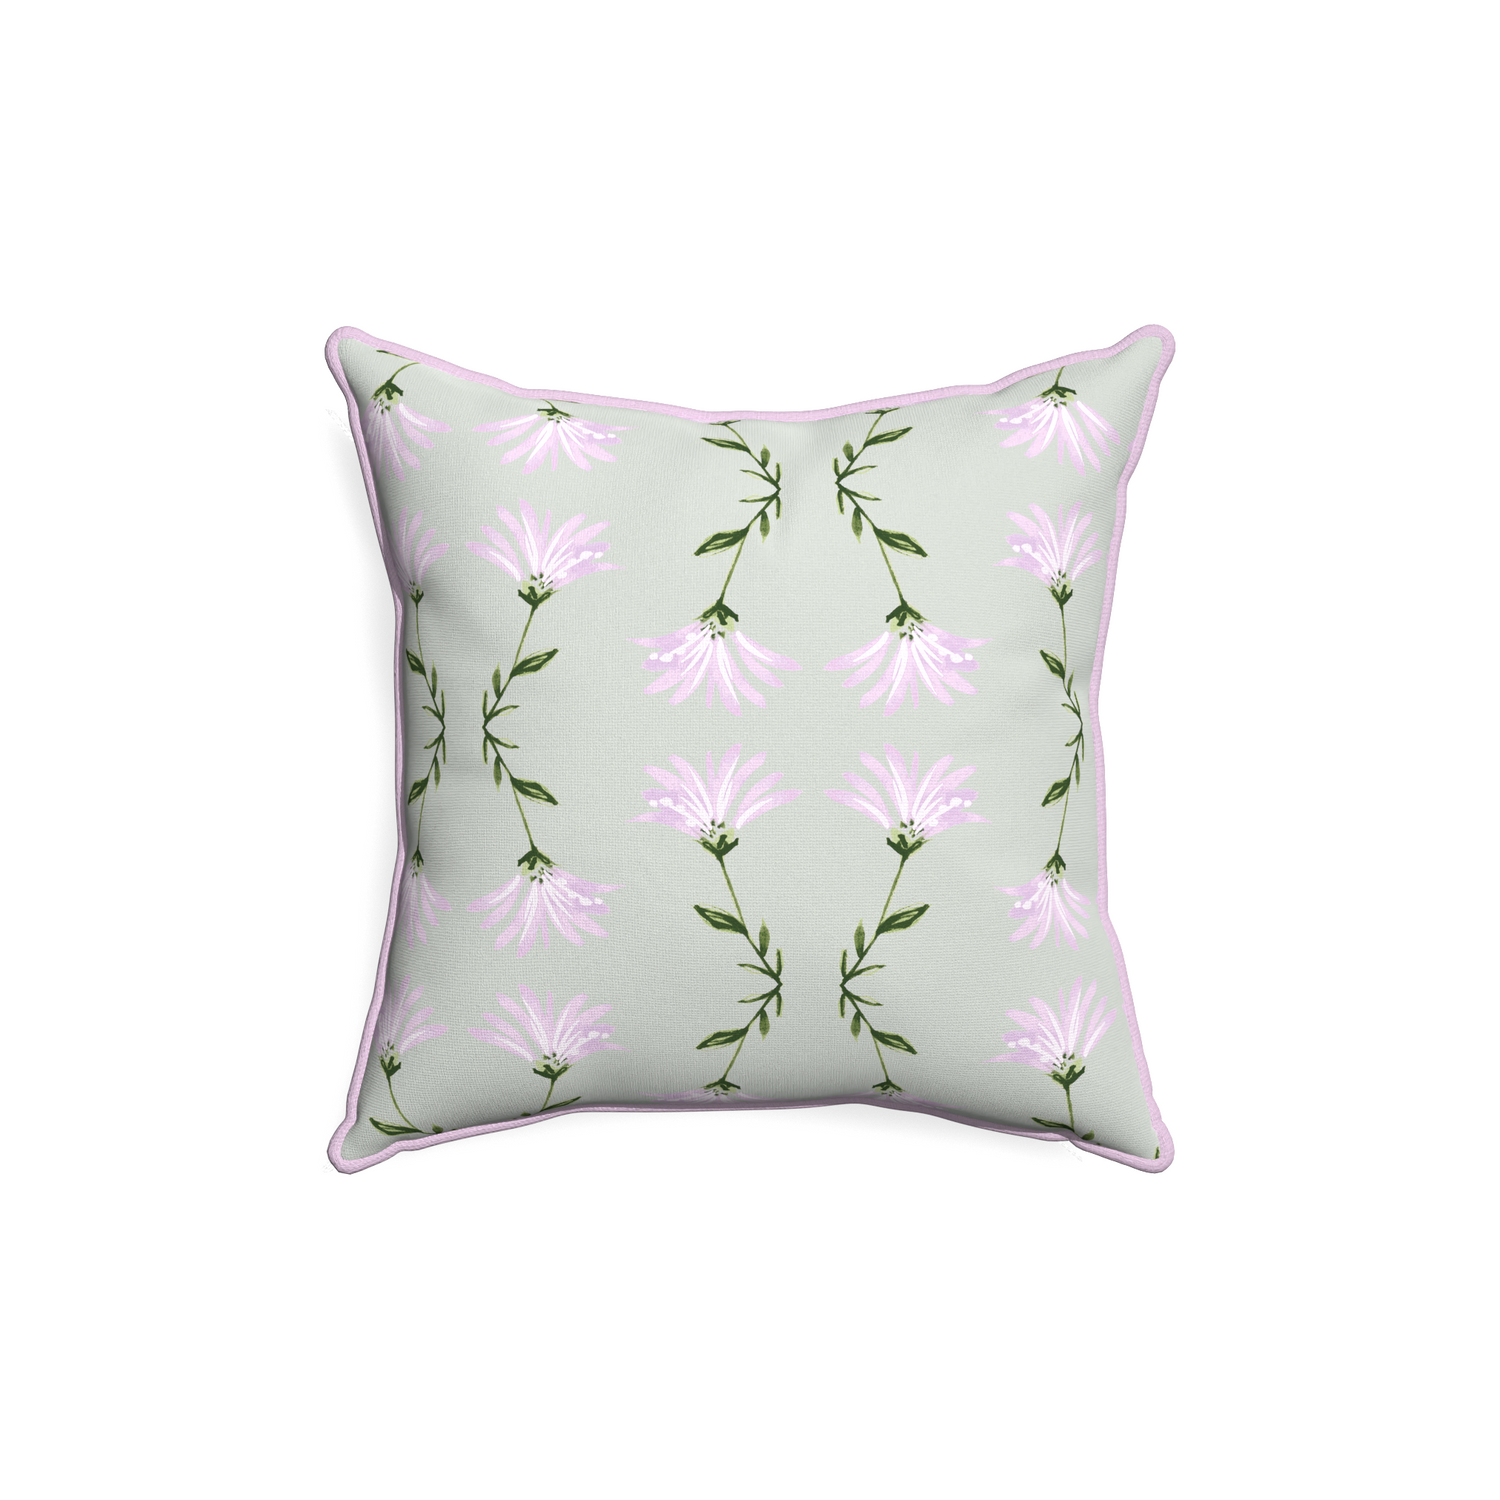 18-square marina sage custom pillow with l piping on white background